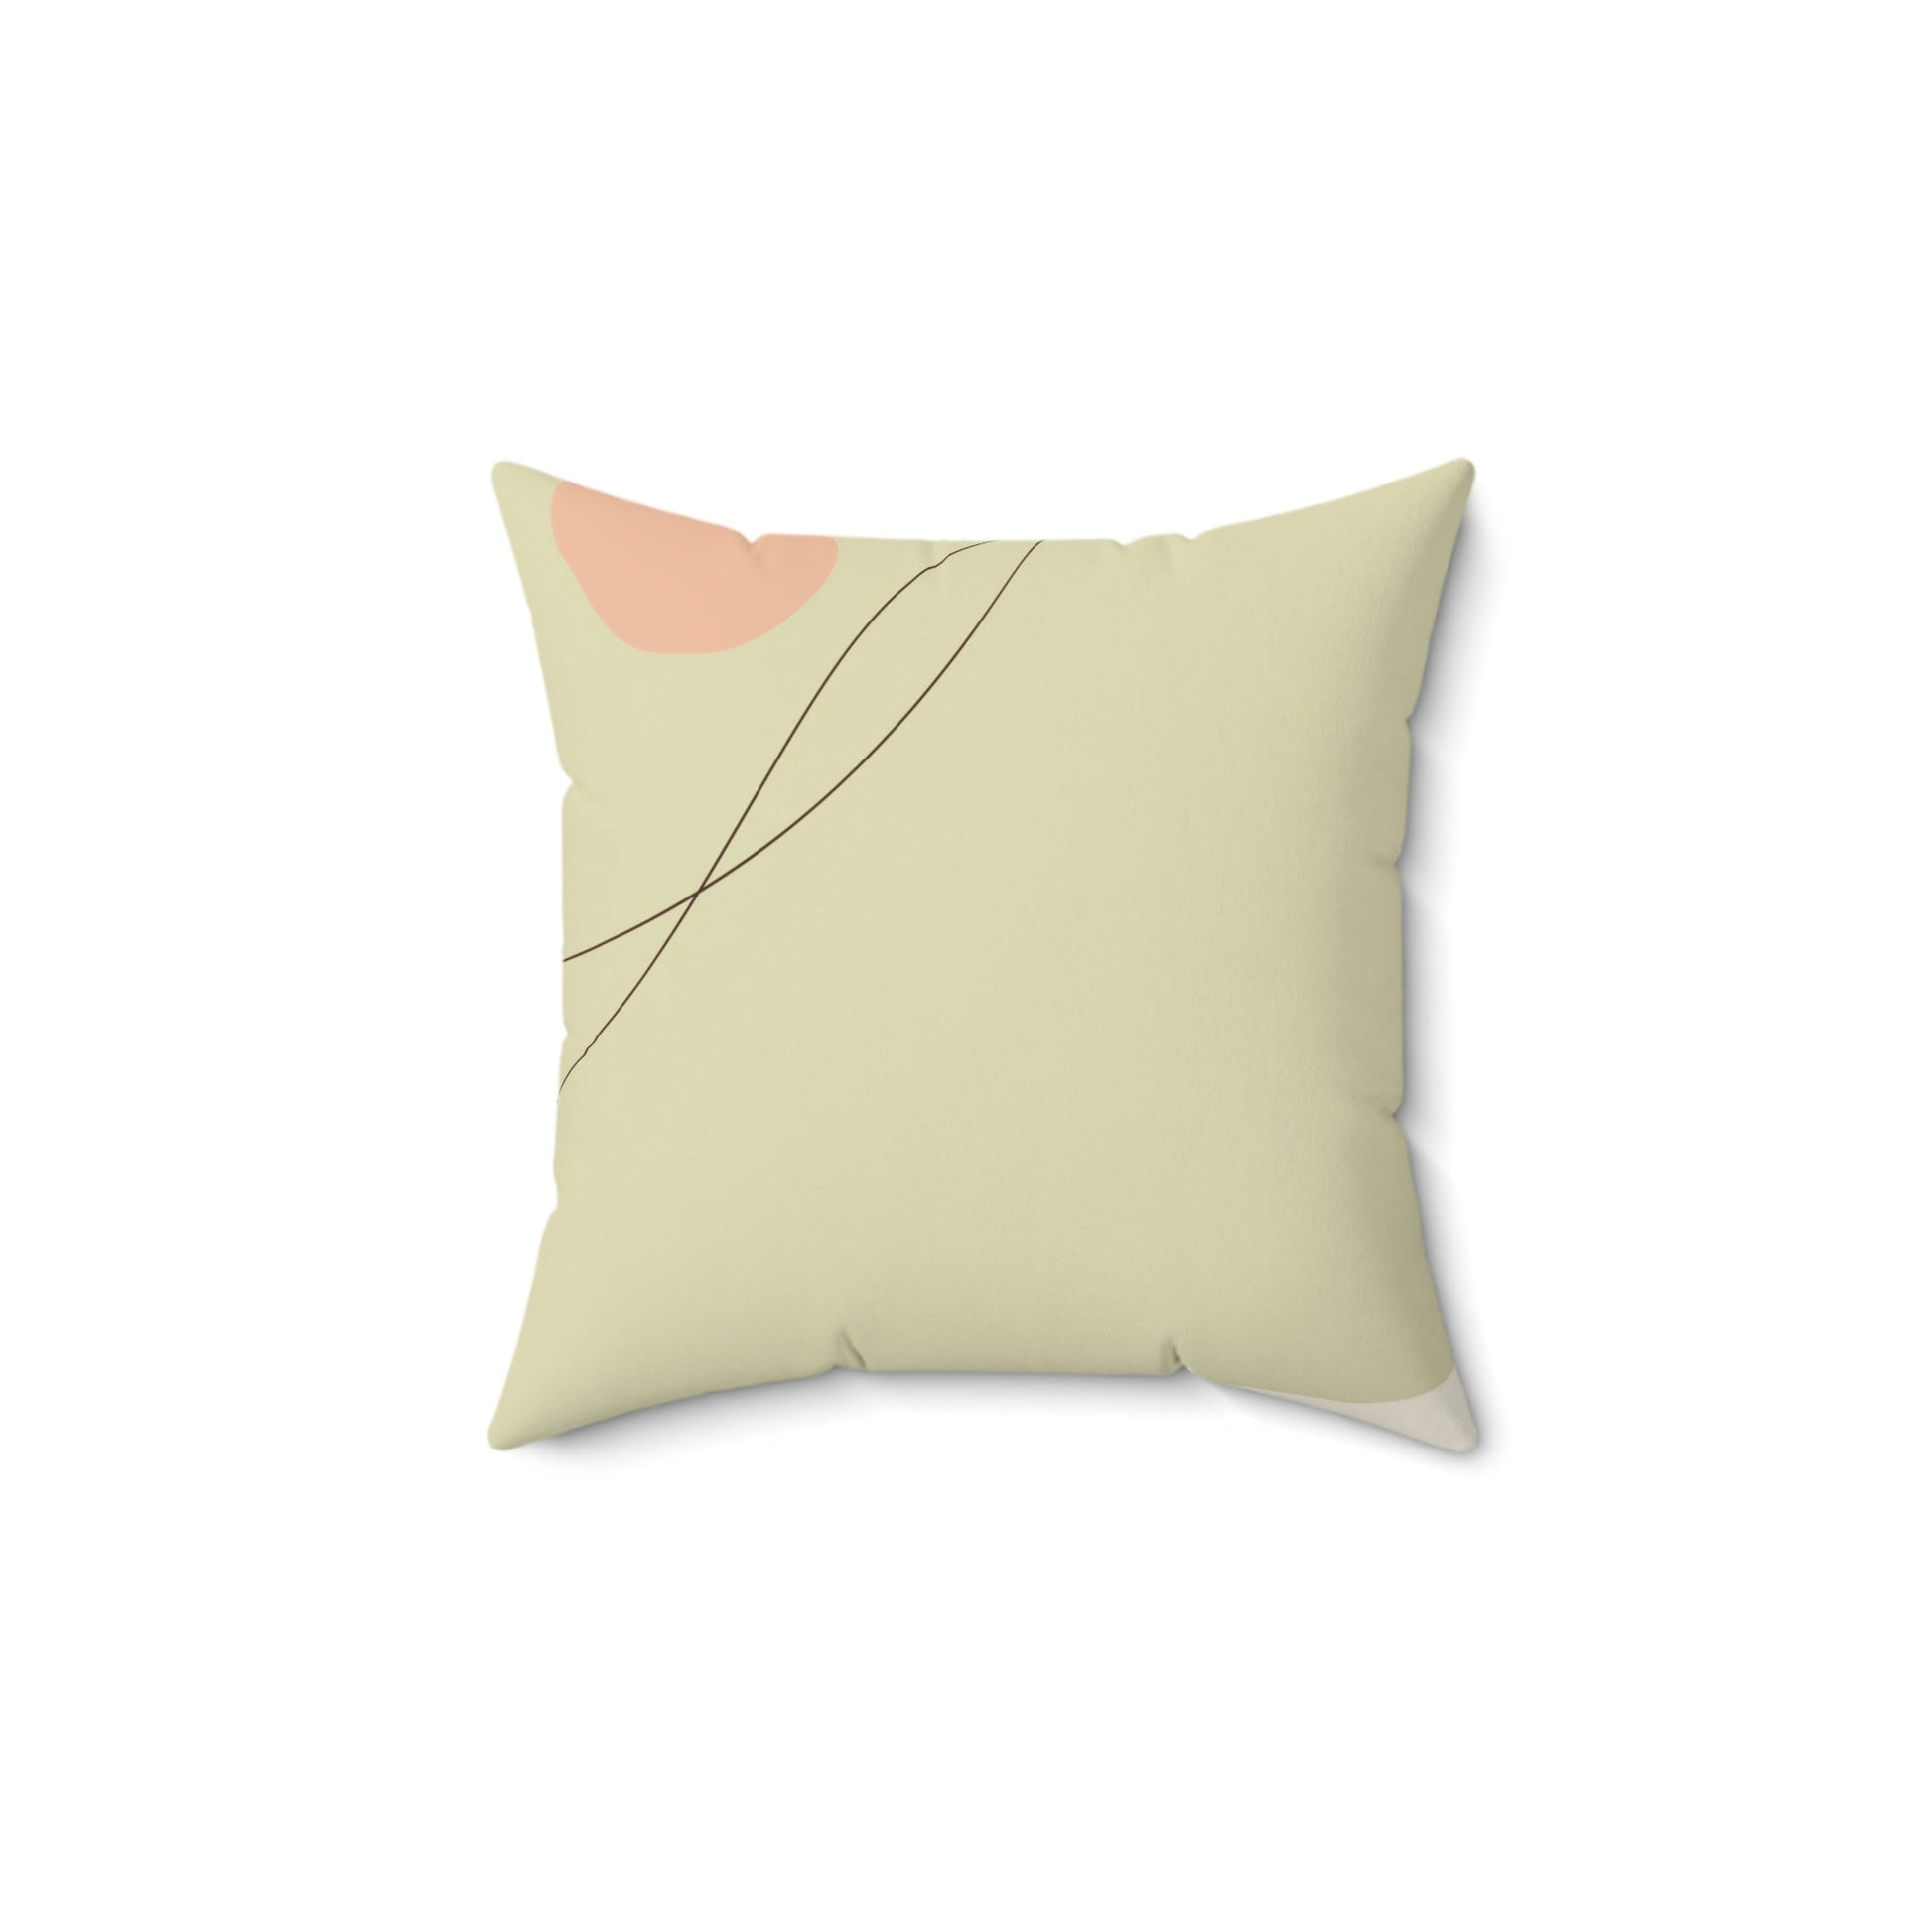 The Modern Twist Square Pillow Home Decor Pink Sweetheart